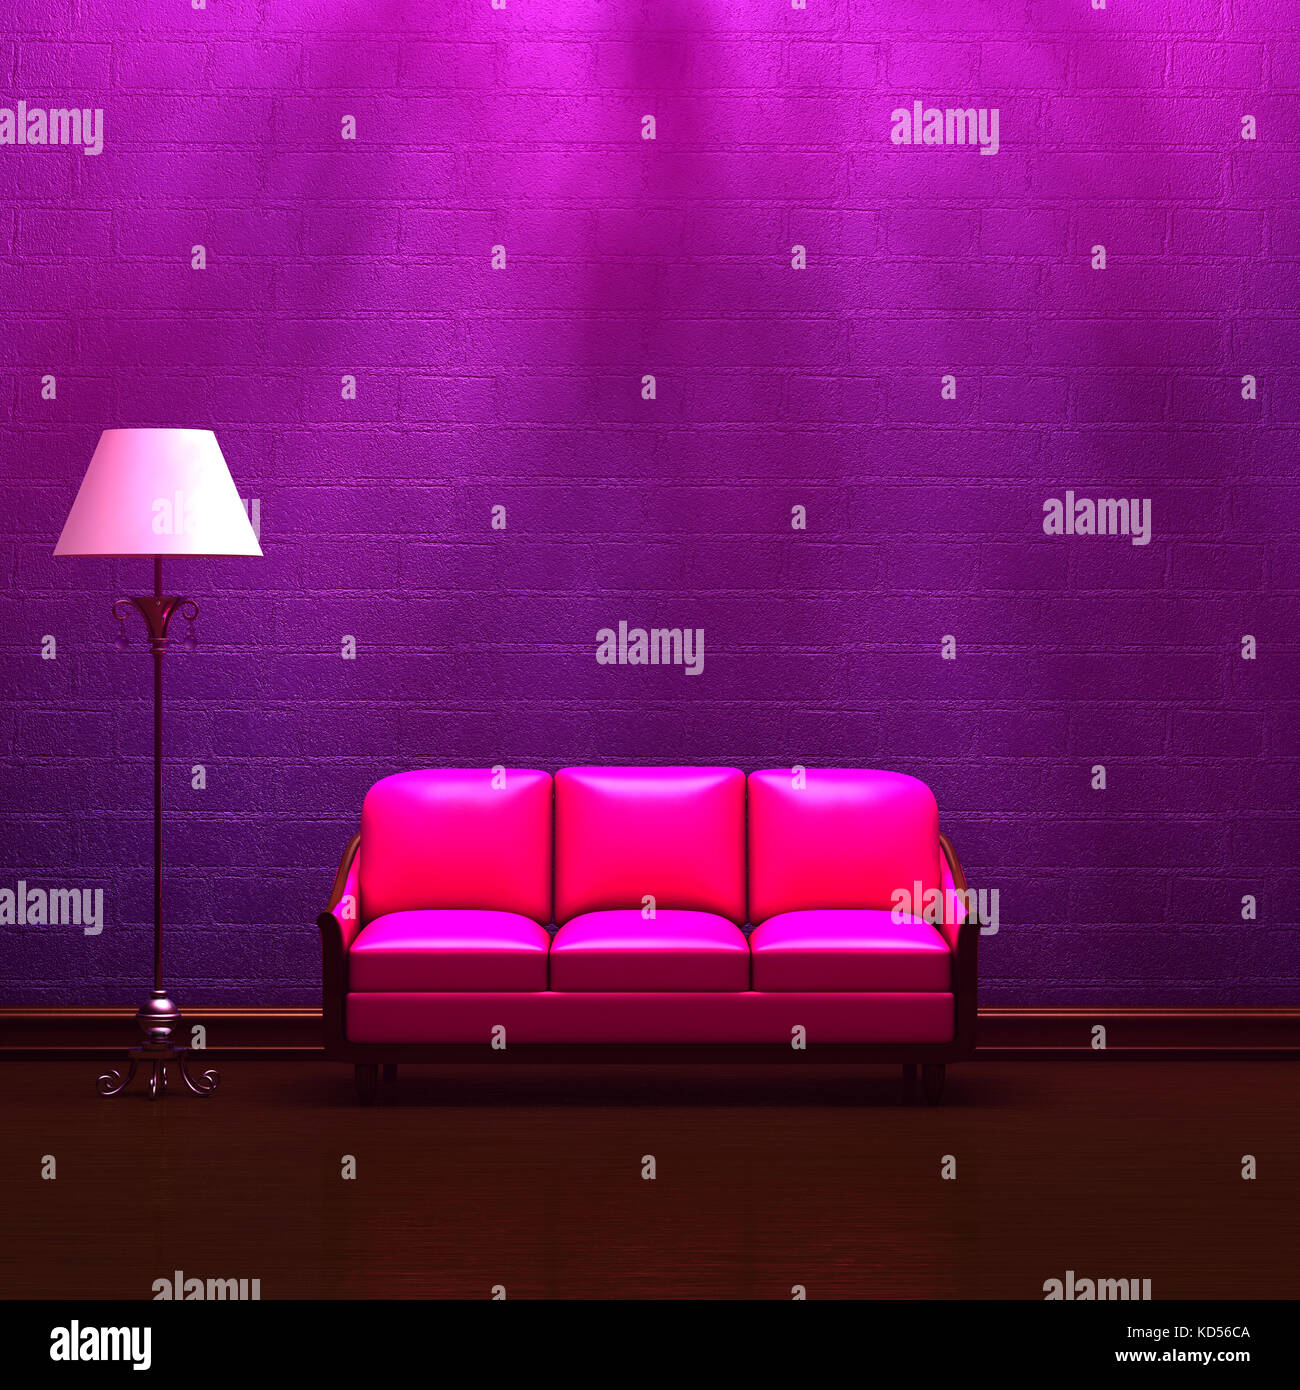 Pink couch  and standard lamp in  purple minimalist interior Stock Photo